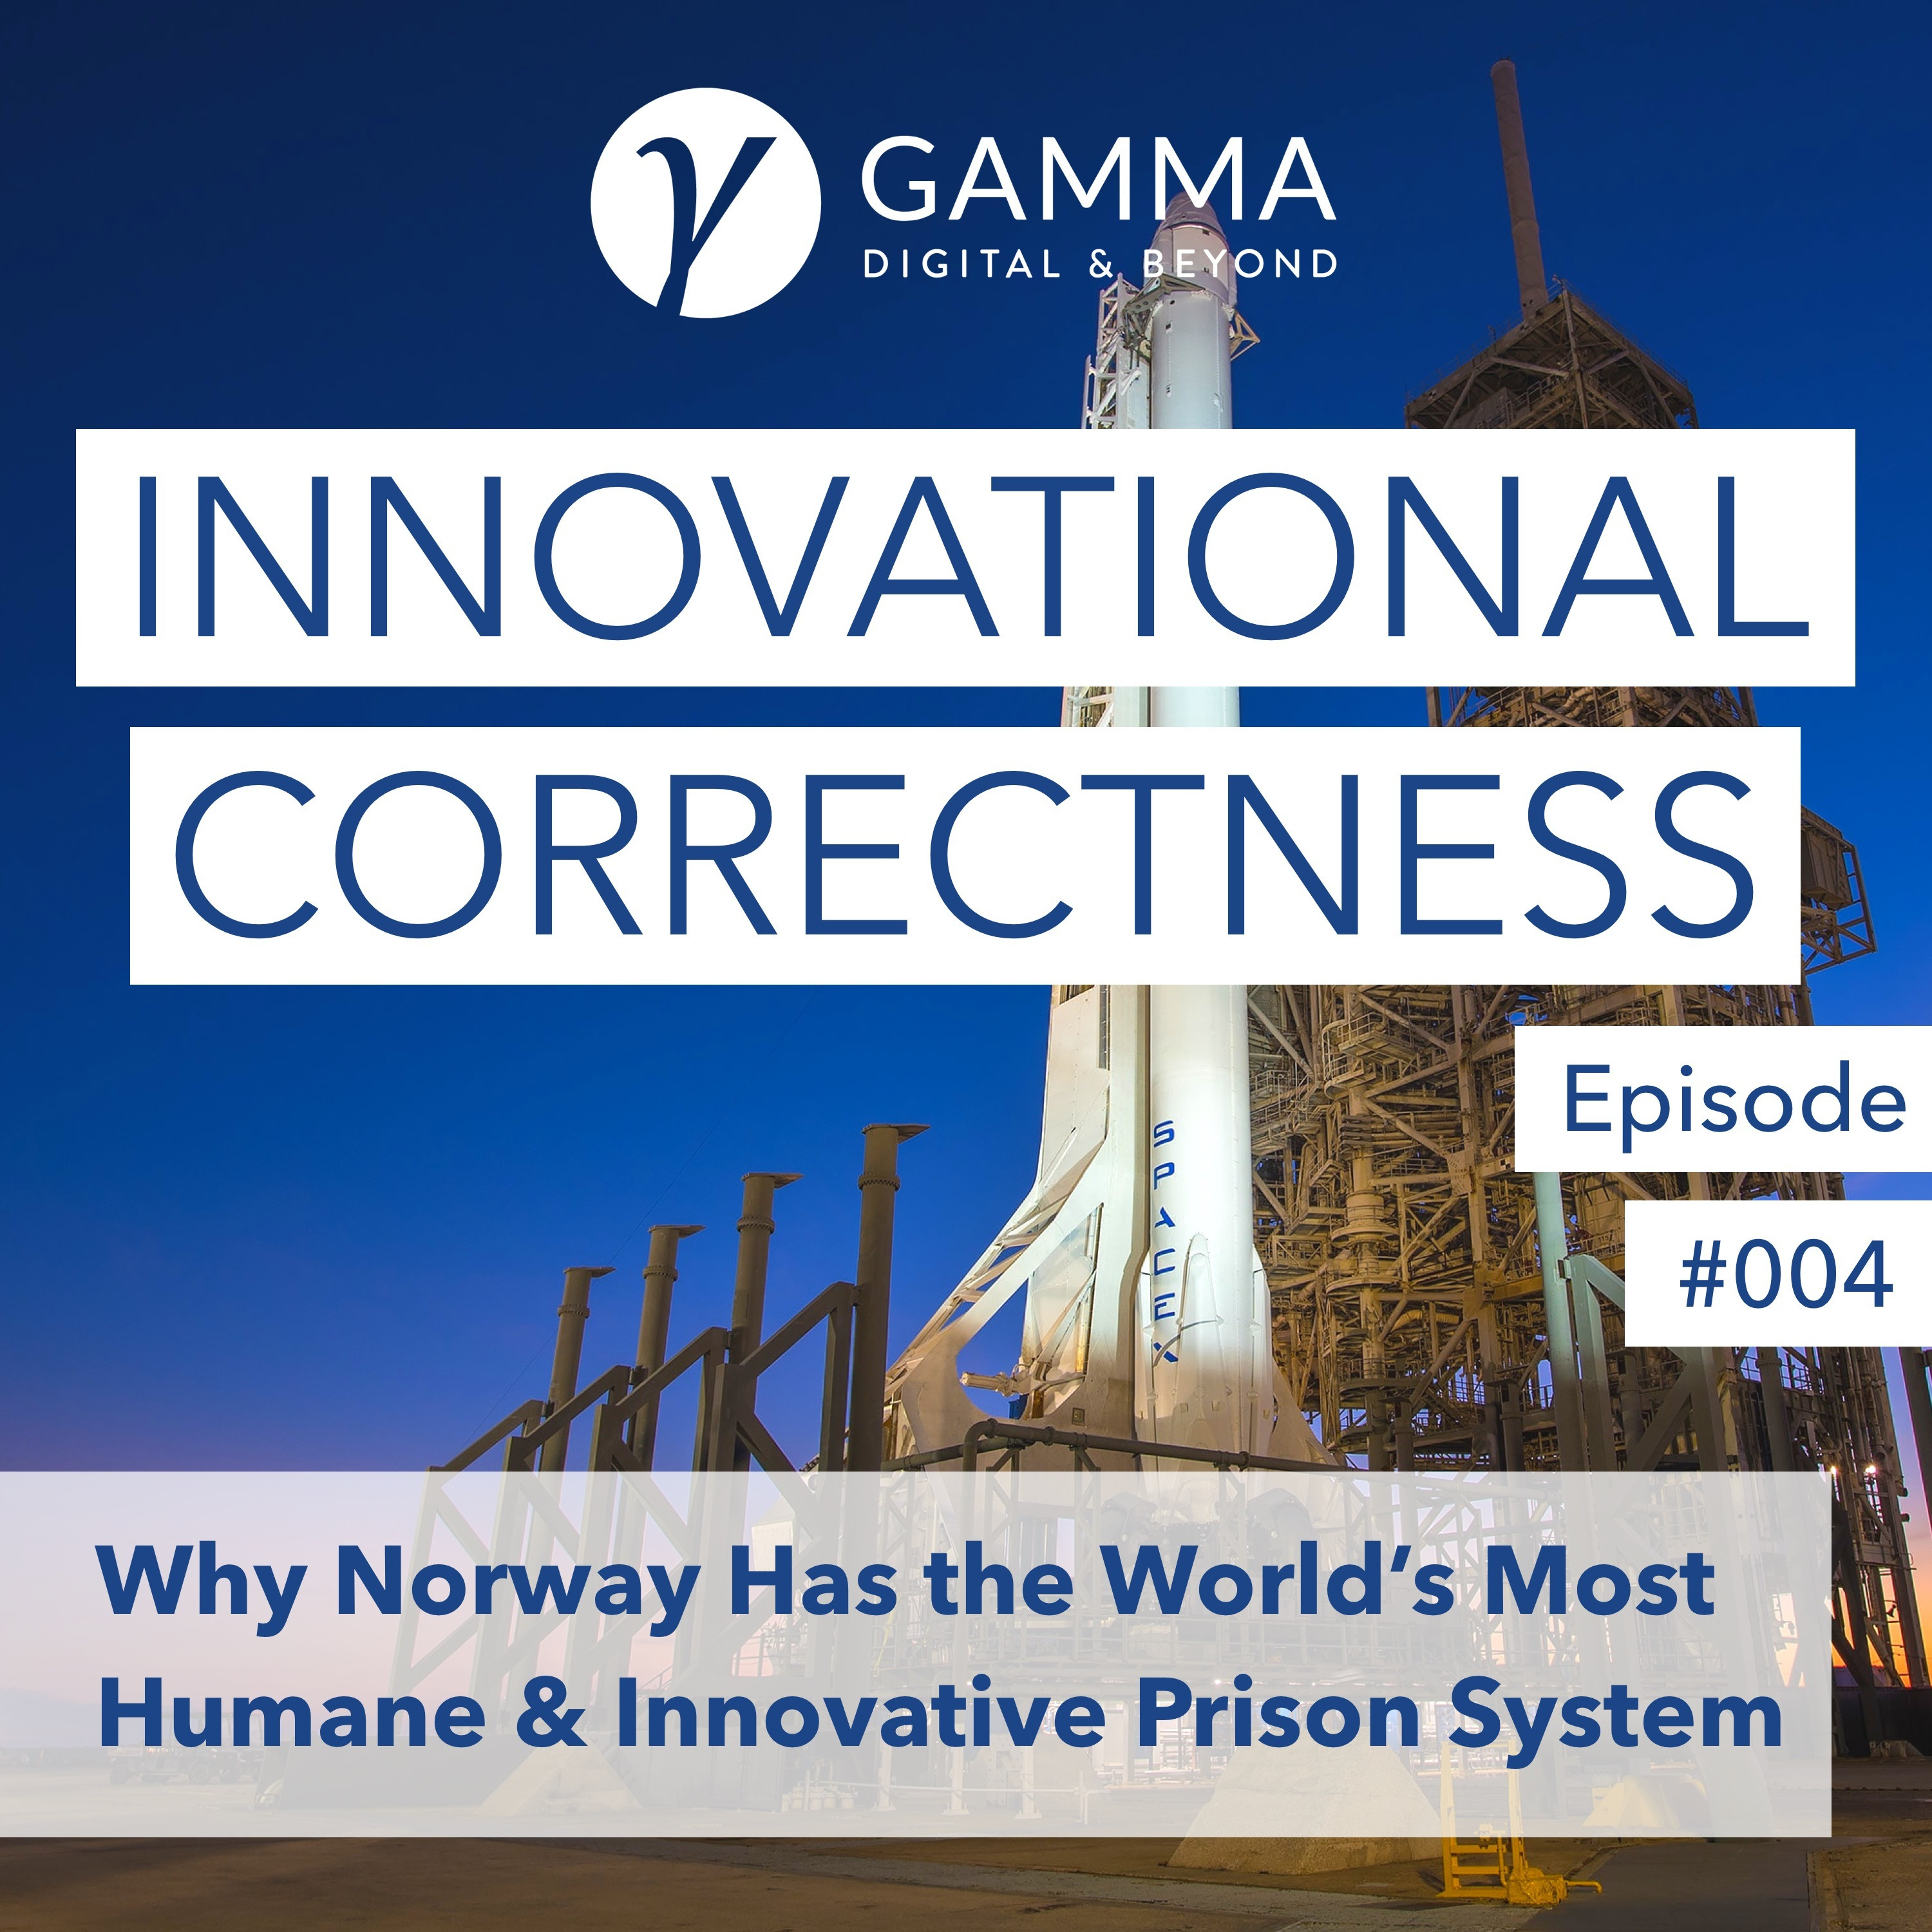 #004: Why Norway Has the World’s Most Humane & Innovative Prison System /w Tom Eberhardt